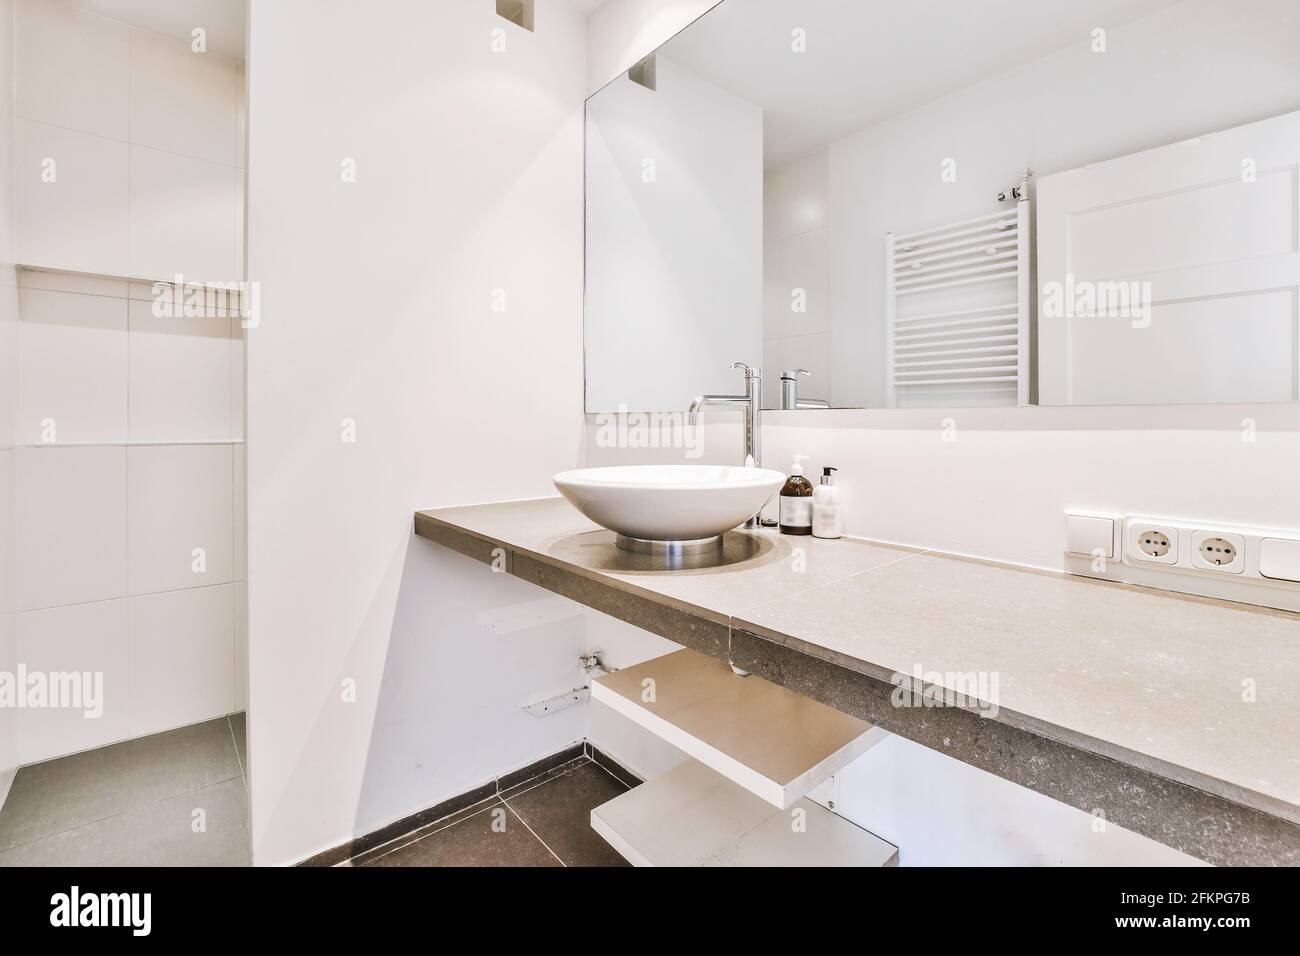 Sink in modern bathroom at home Stock Photo